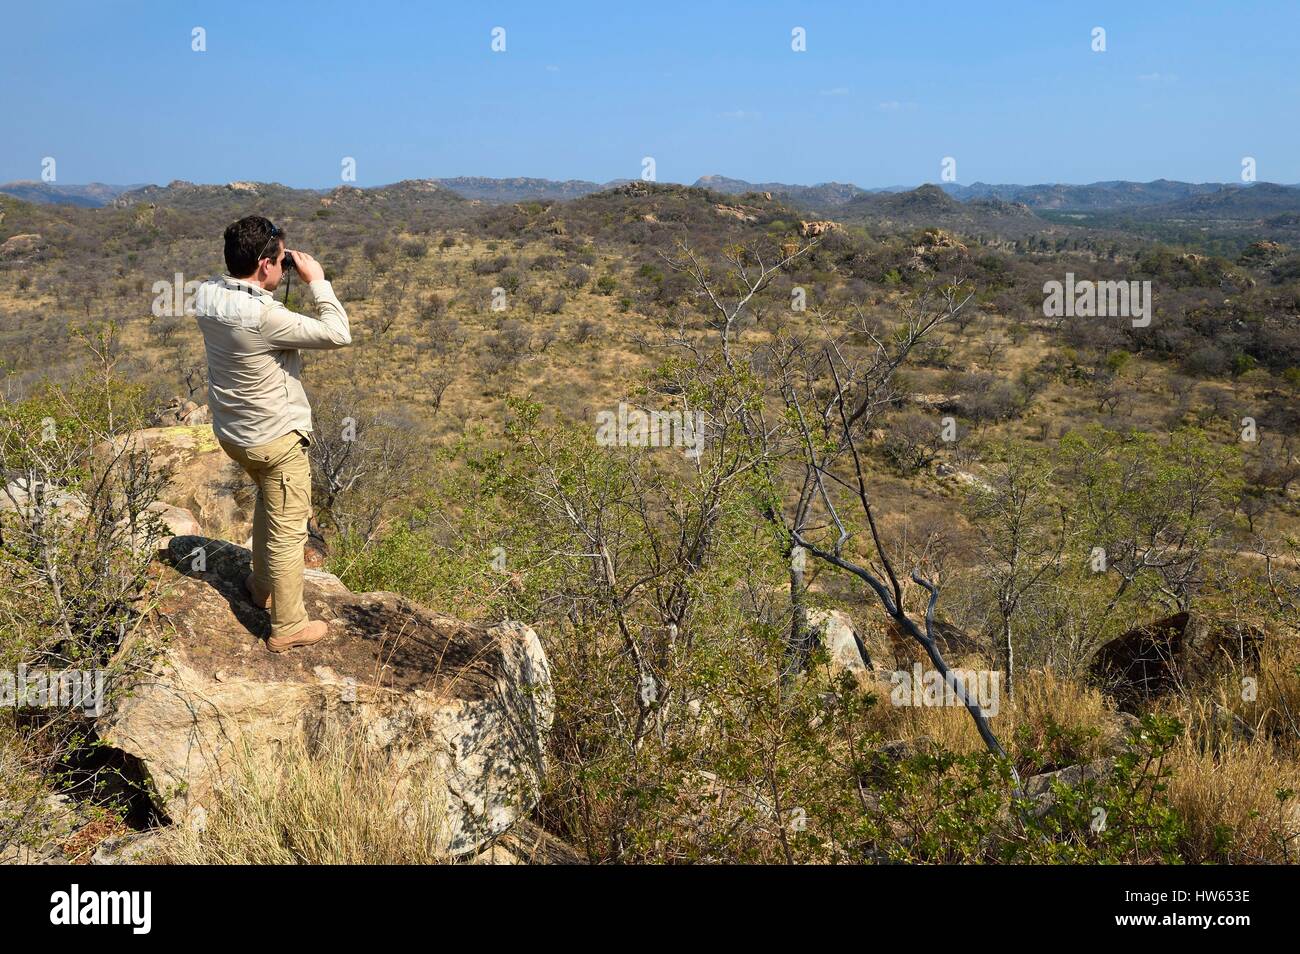 Zimbabwe, Matabeleland South Province, Matobo or Matopos Hills National Park, listed as World Heritage by UNESCO, walking safari in search of White Rhinoceros, looking through binoculars Stock Photo